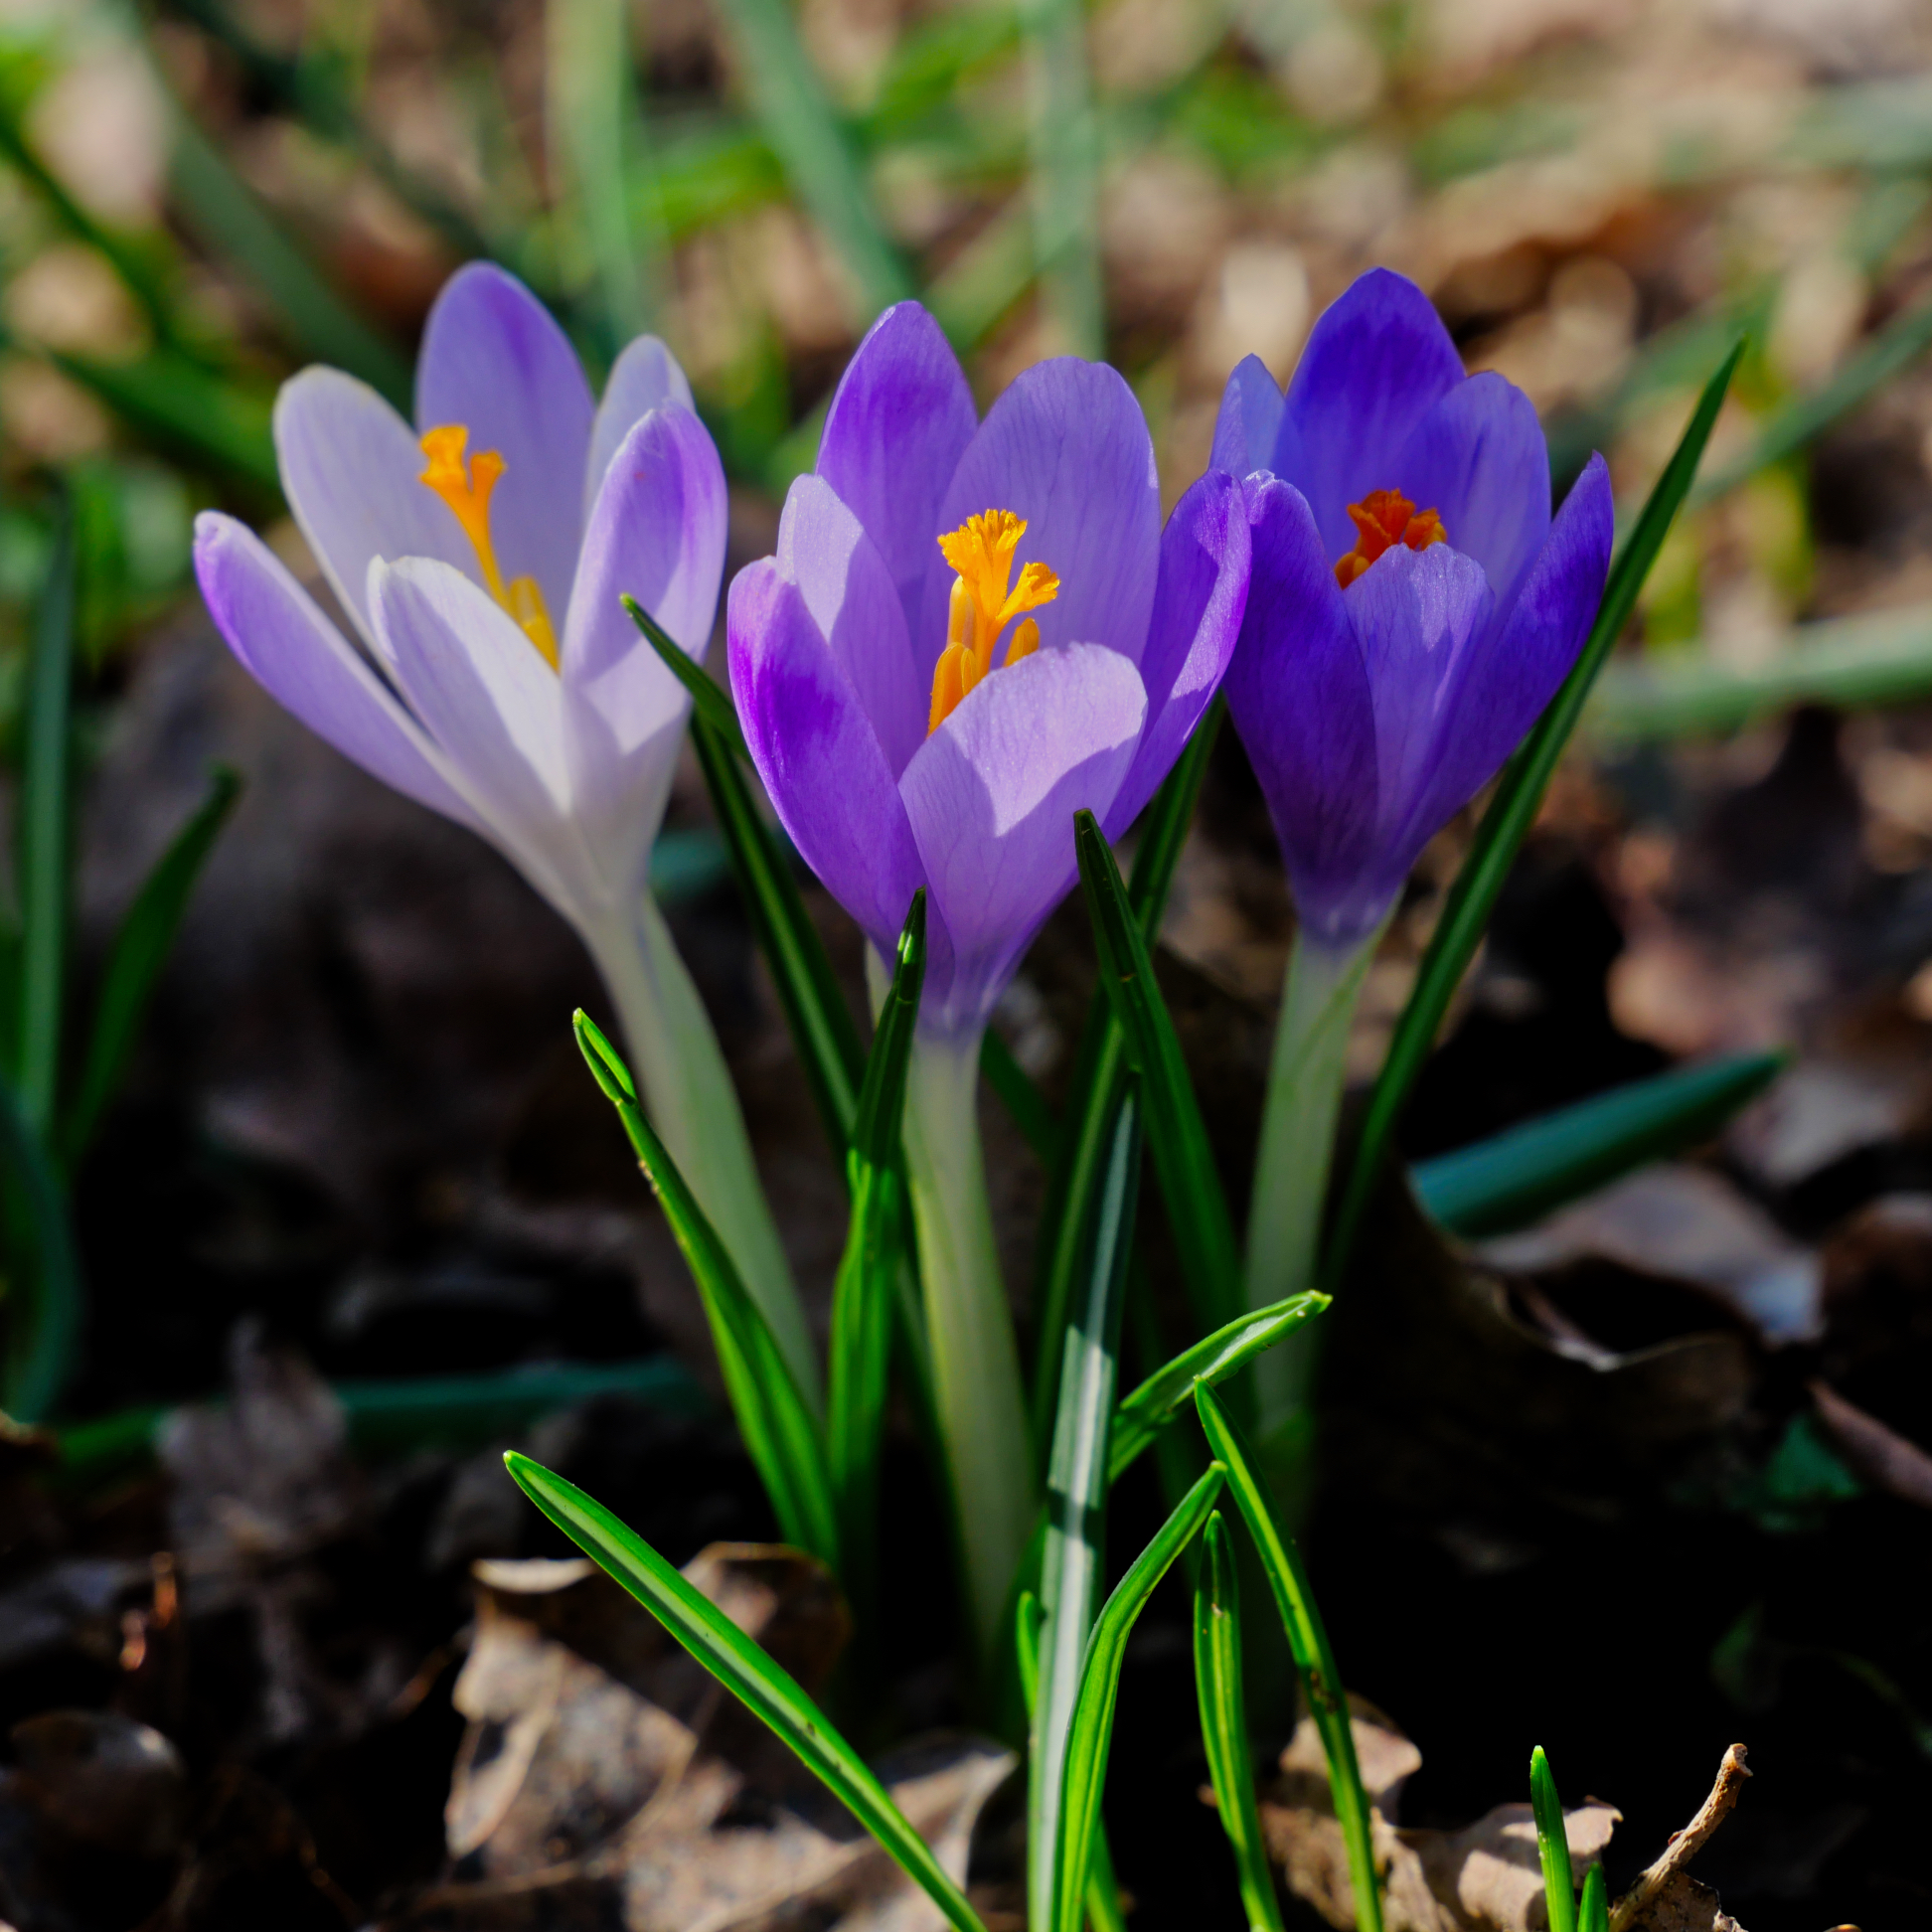 the colours of the Crocus...